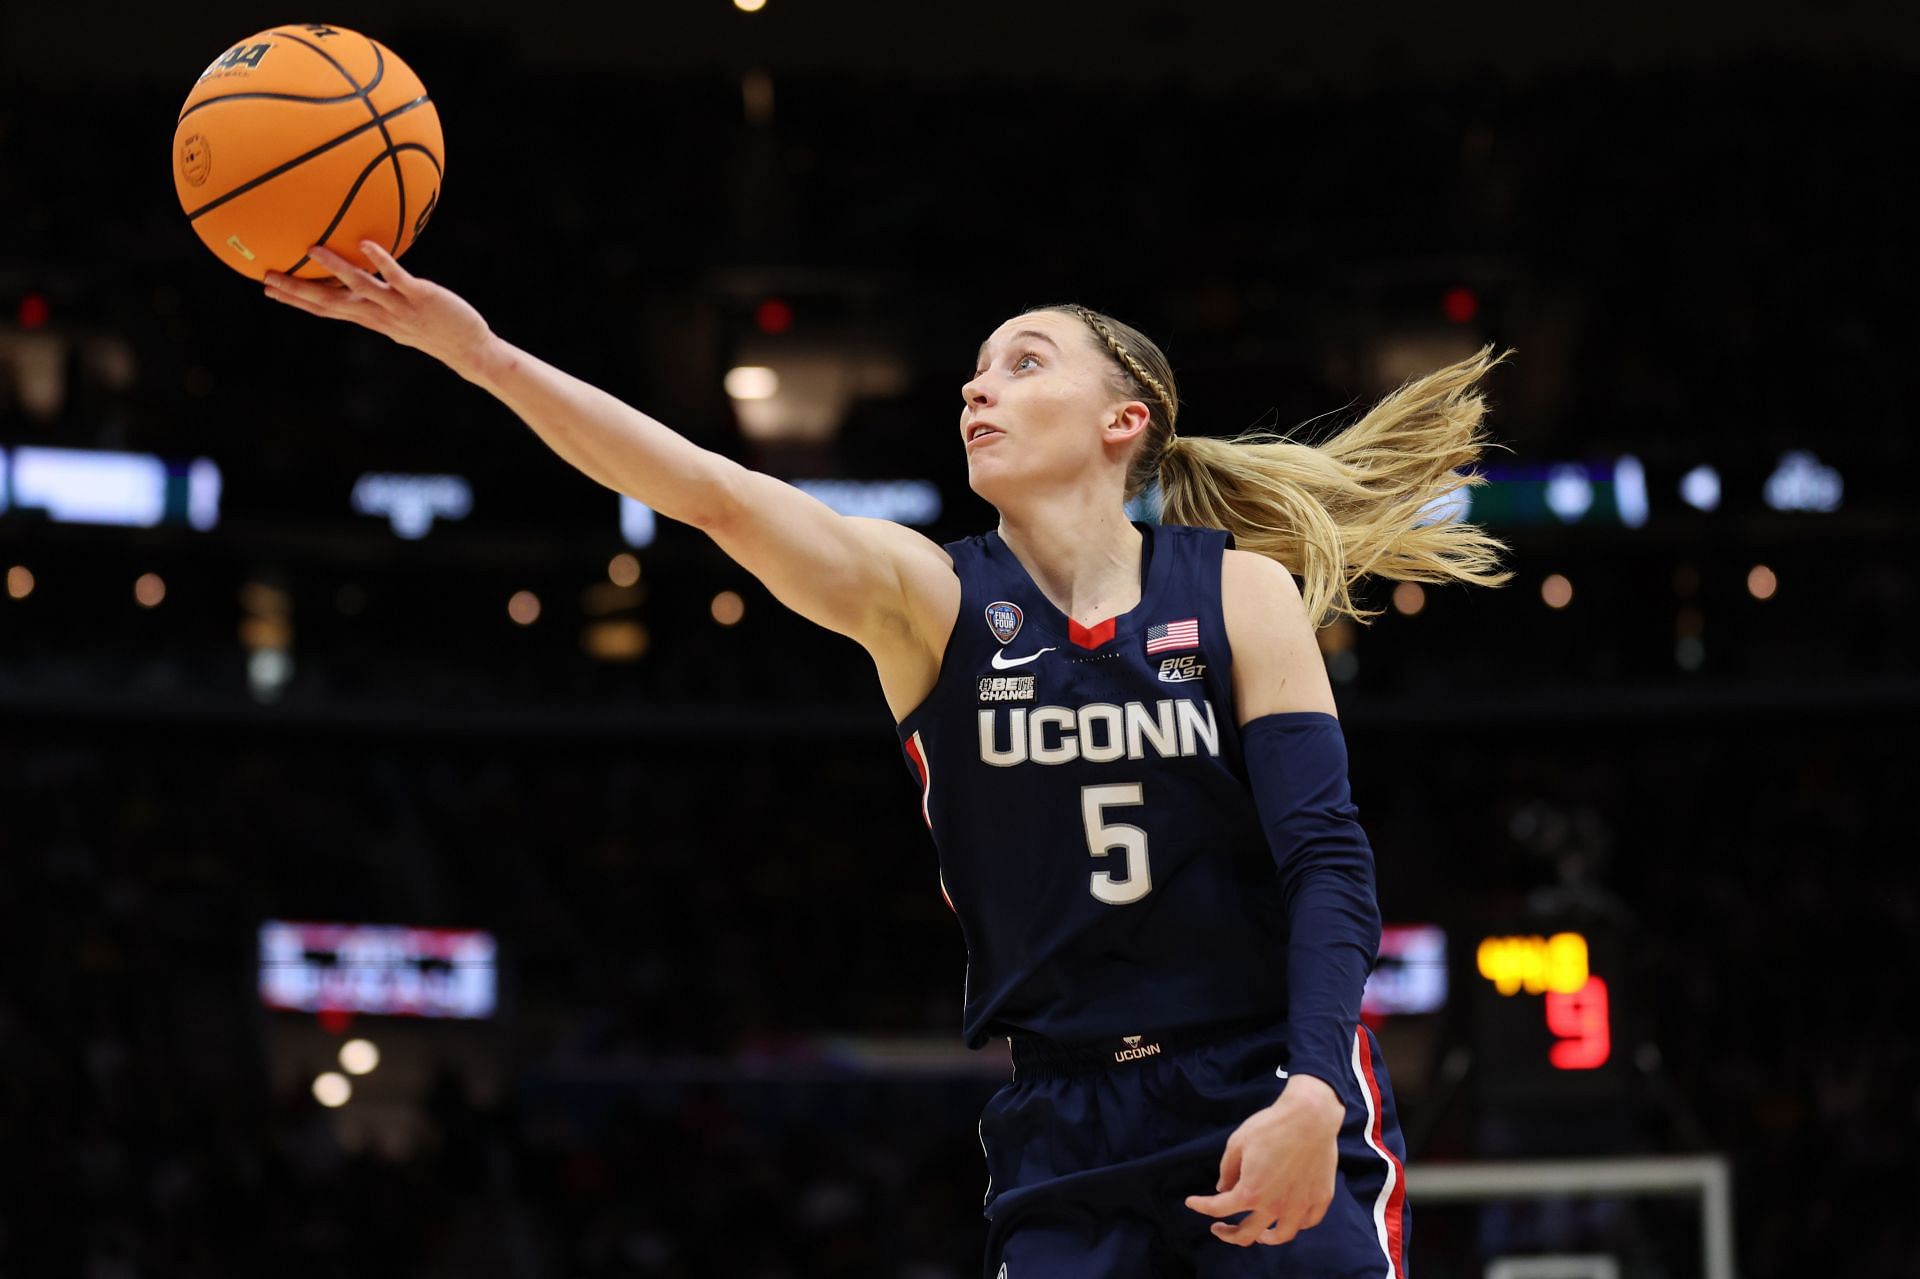 Paige Bueckers would have likely been one of the top picks in the WNBA Draft had she not elected to return to school.